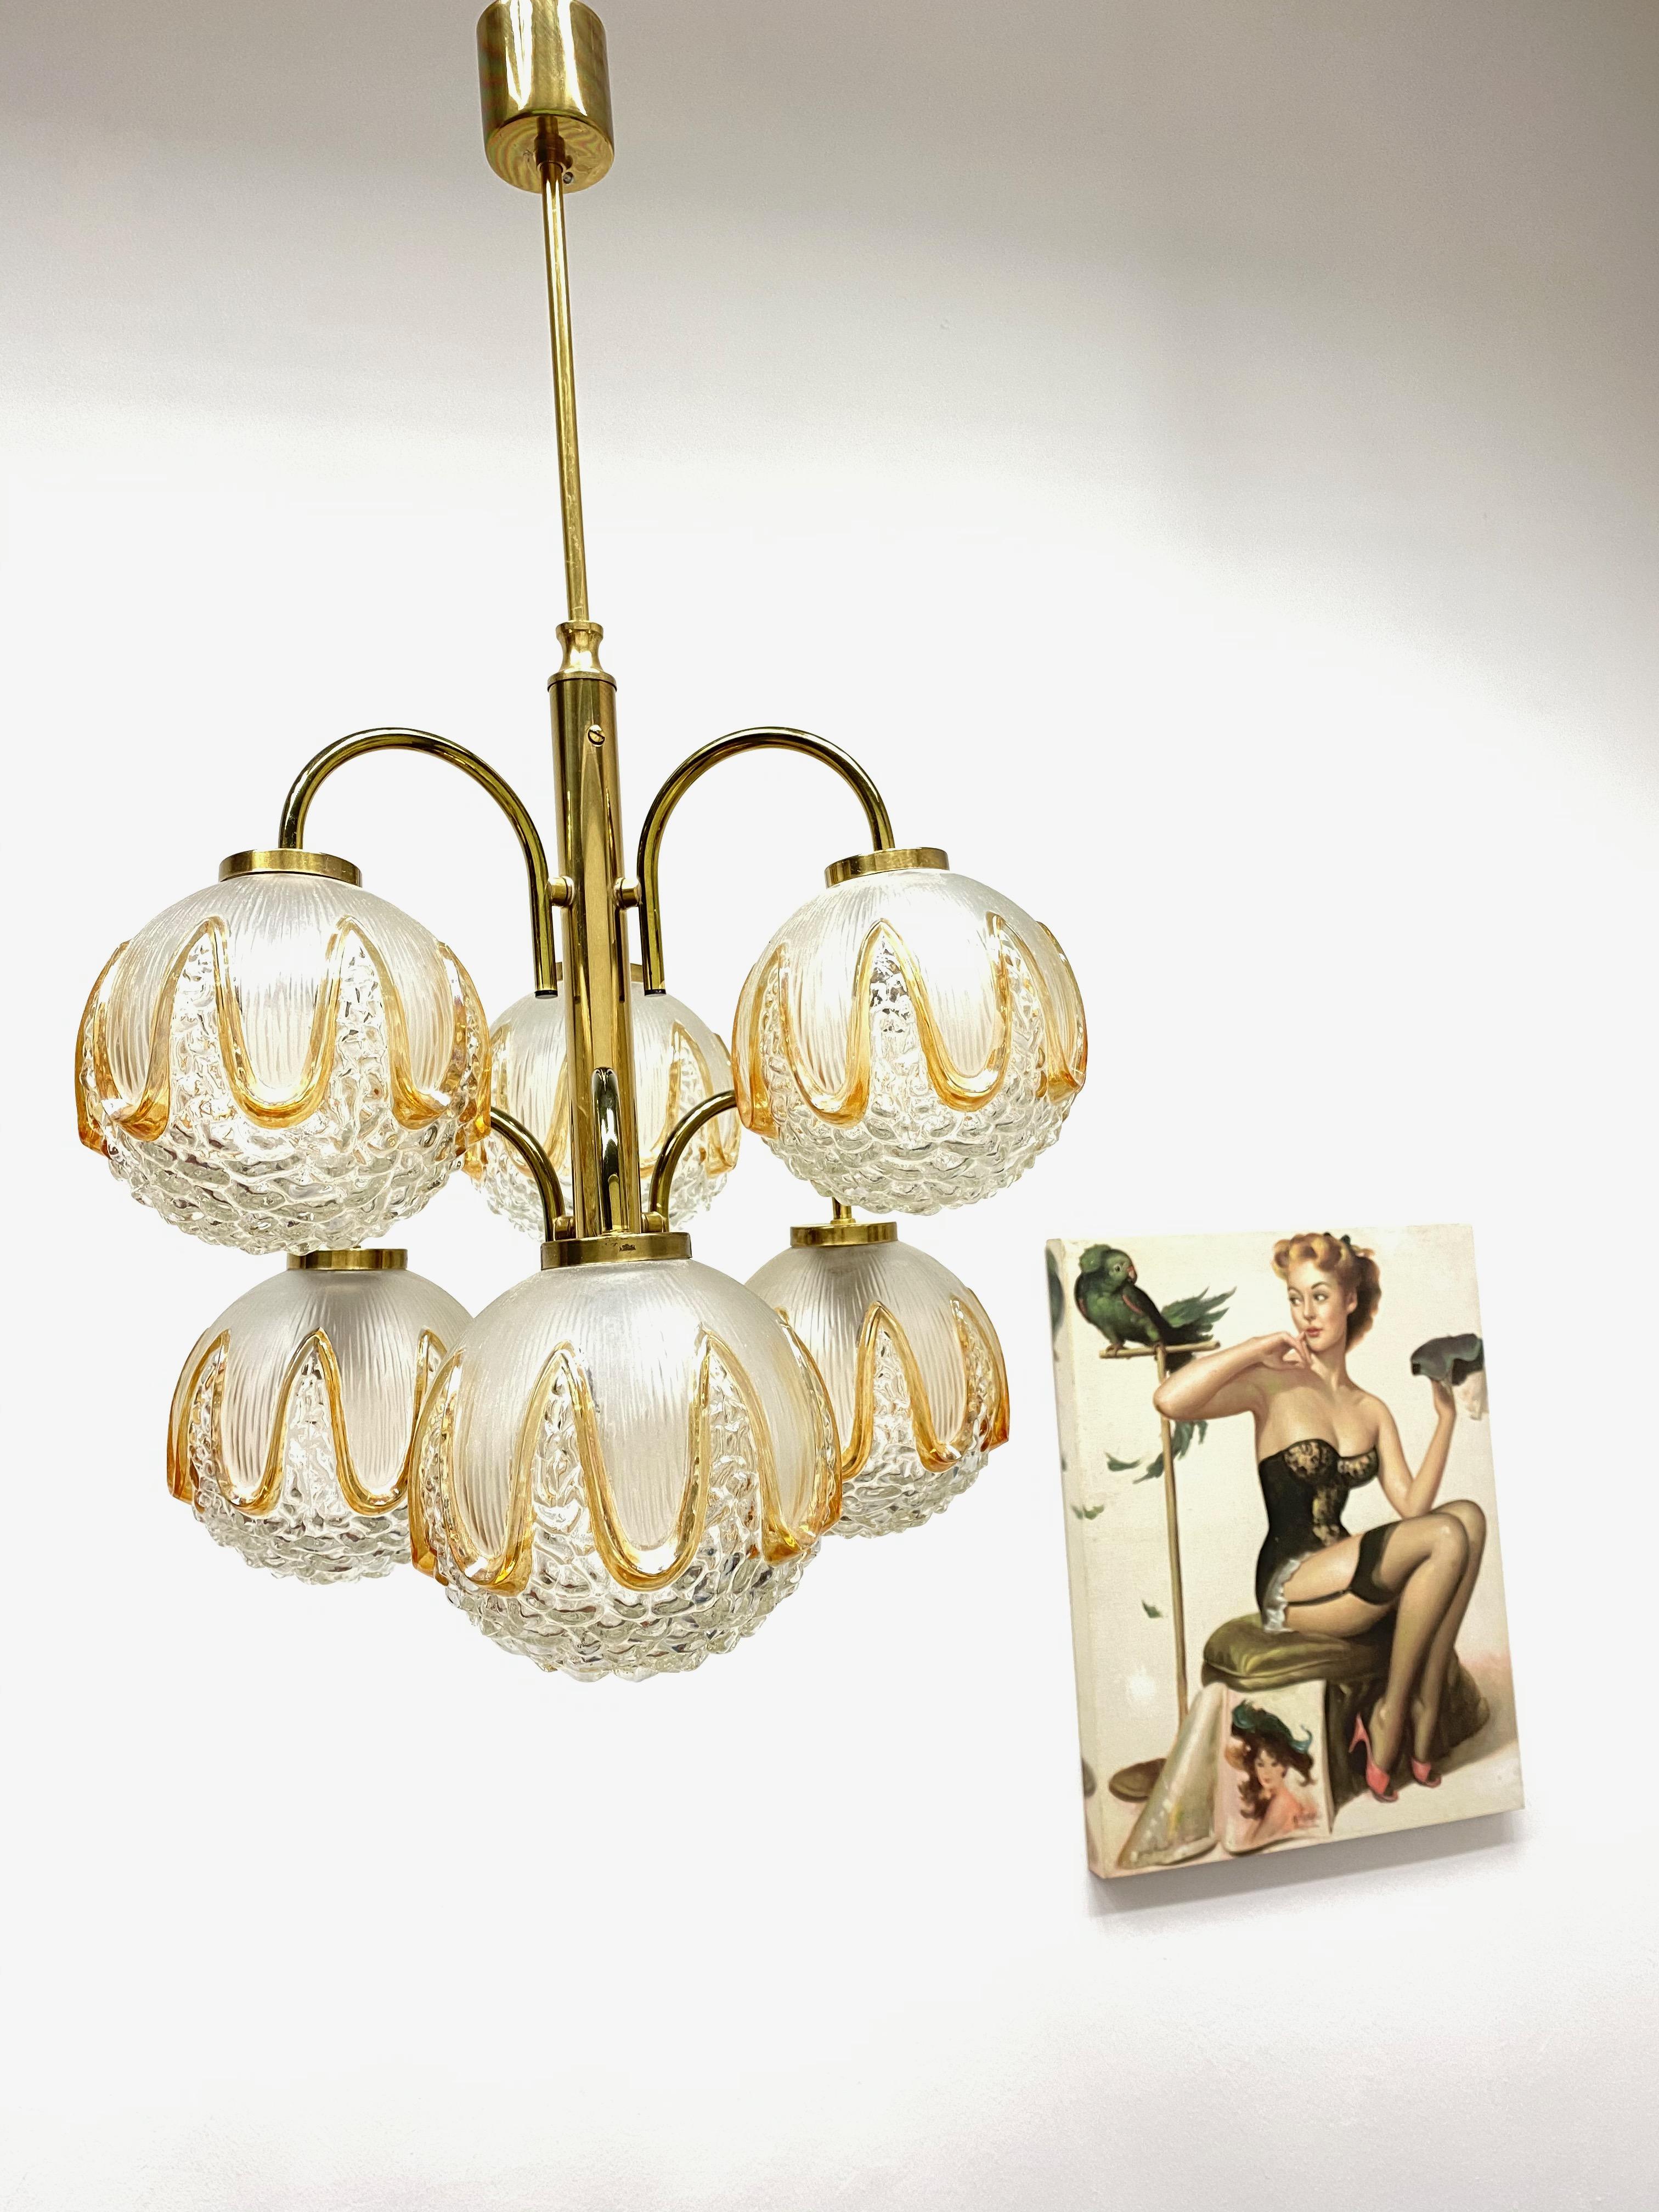 A Richard Essig chandelier made in Germany in the 1960s. It is fascinating with its design and six biomorphic glass balls. The body of the light is made of full metal, including the arms.
The chandelier requires 6 European E14 / 110 Volt candelabra